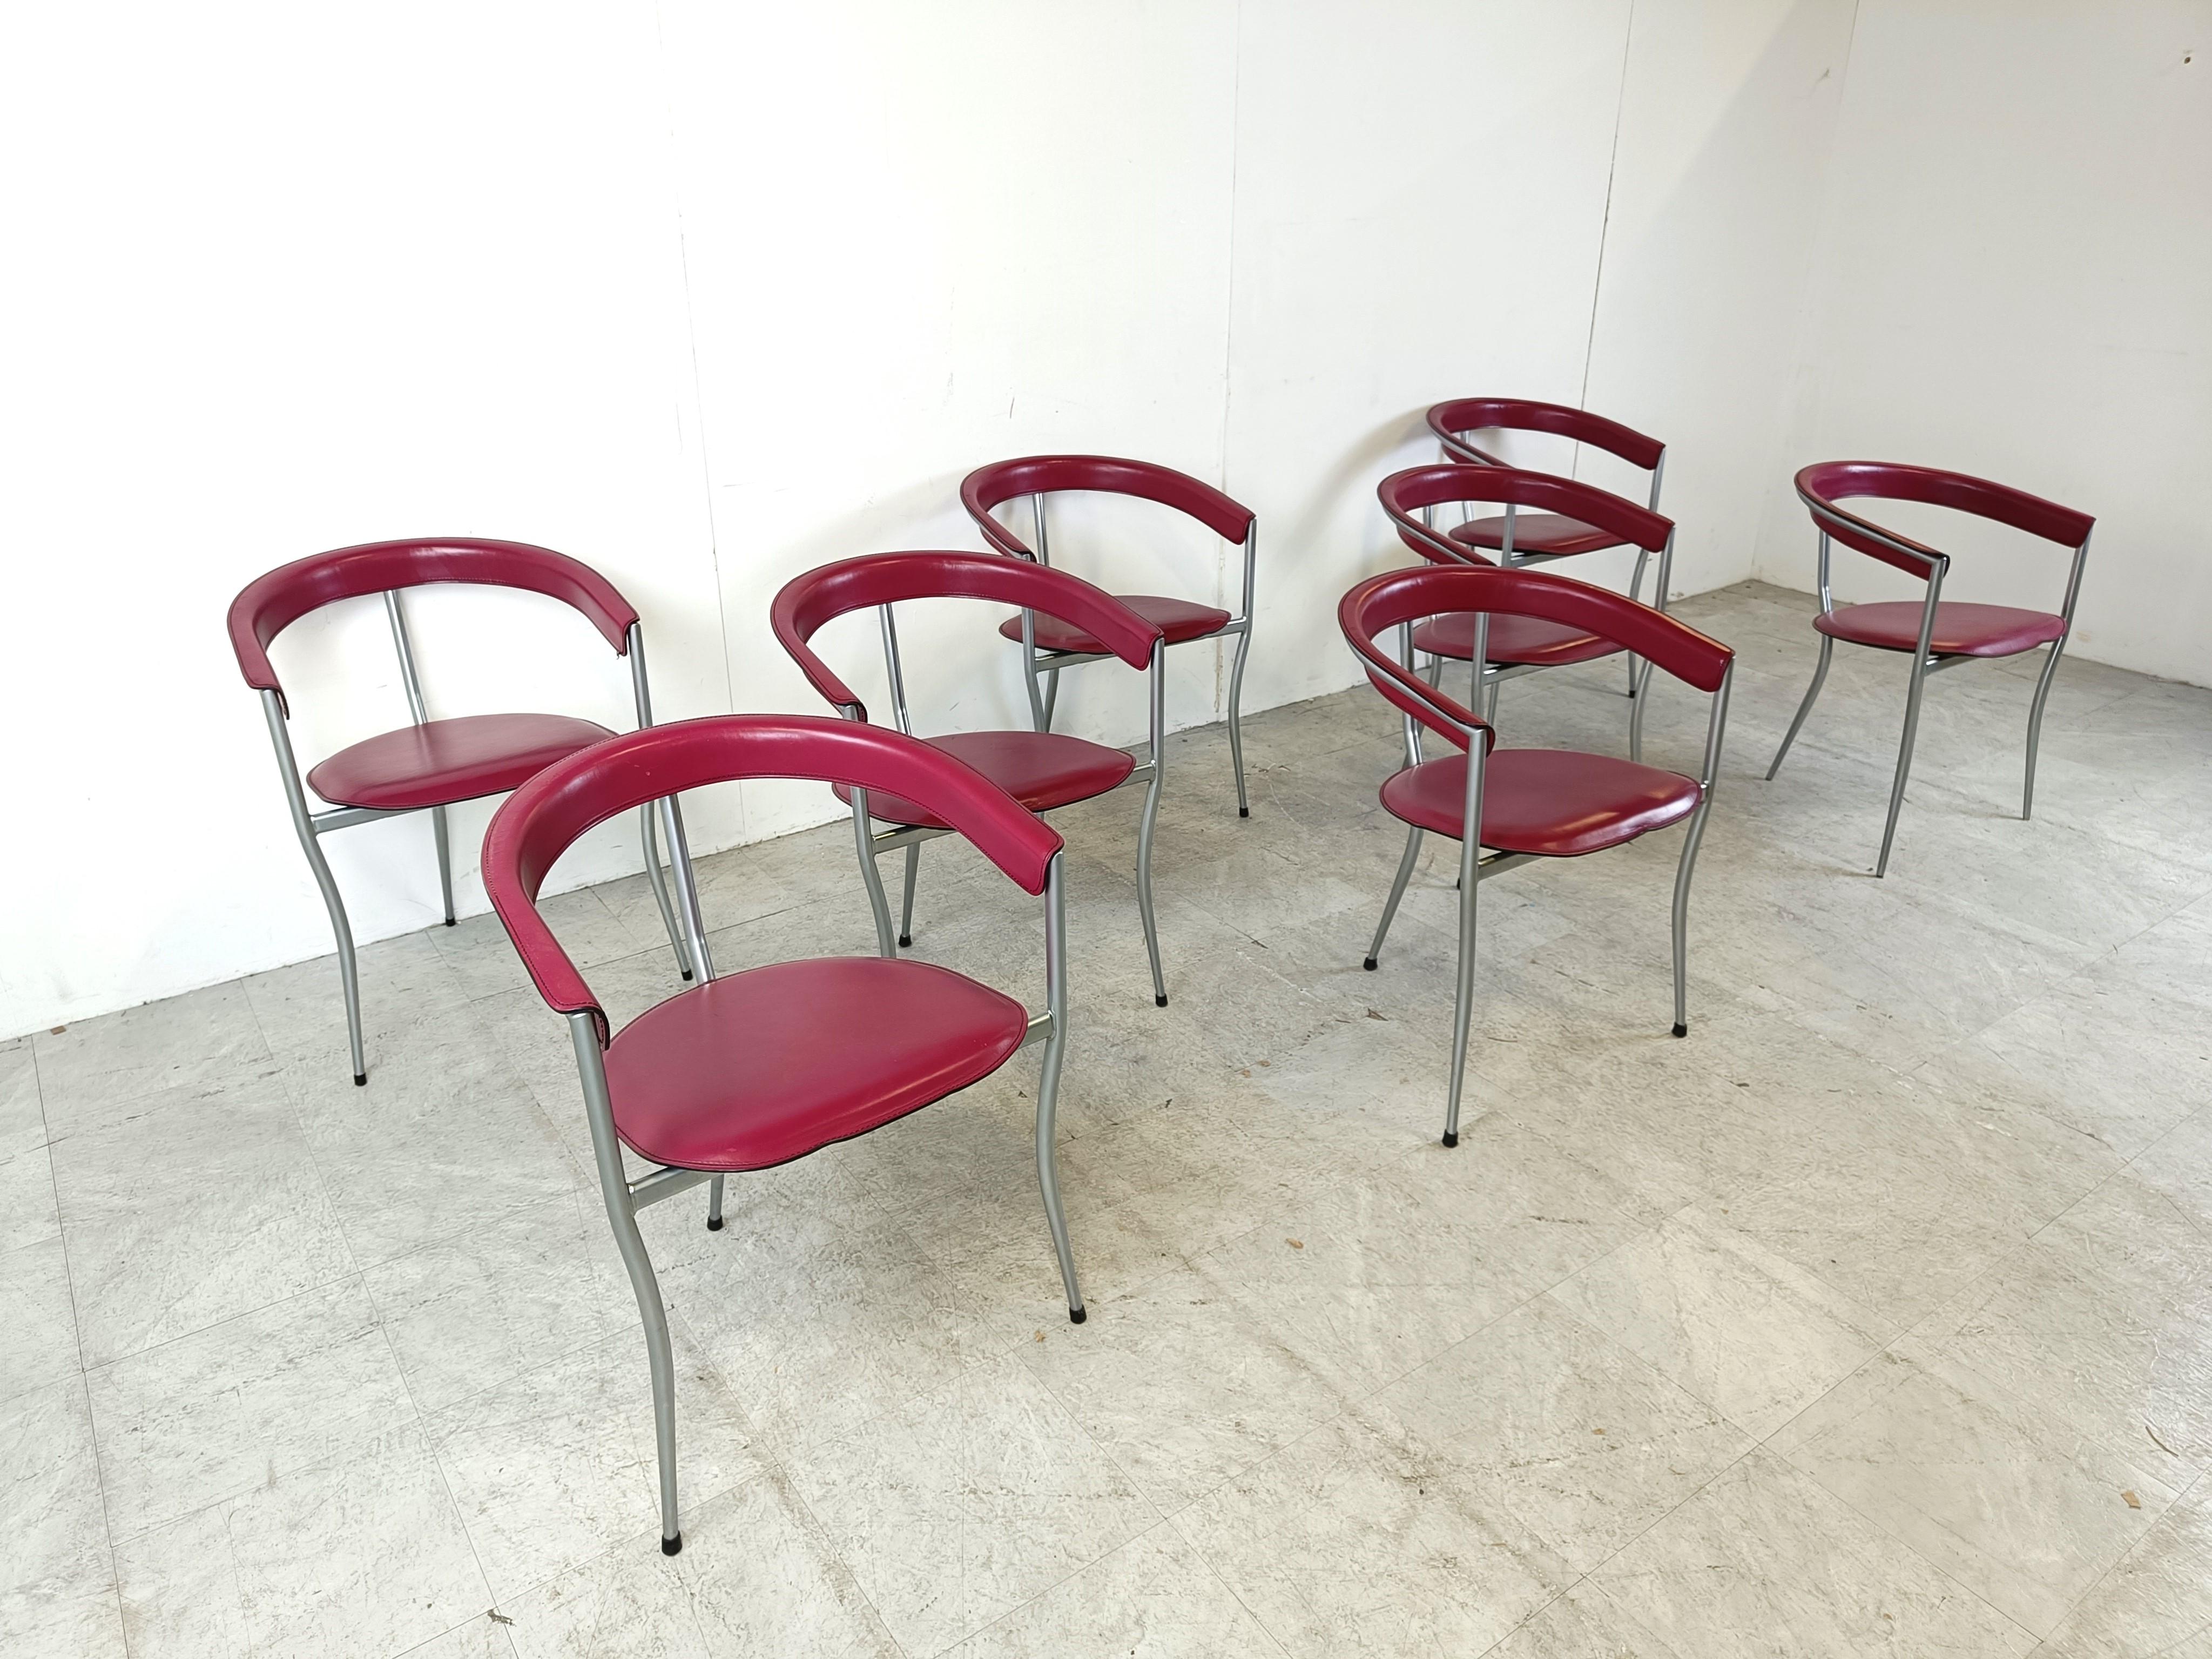 Late 20th Century Vintage leather armchairs by Arrben italy, 1980s - set of 8 For Sale